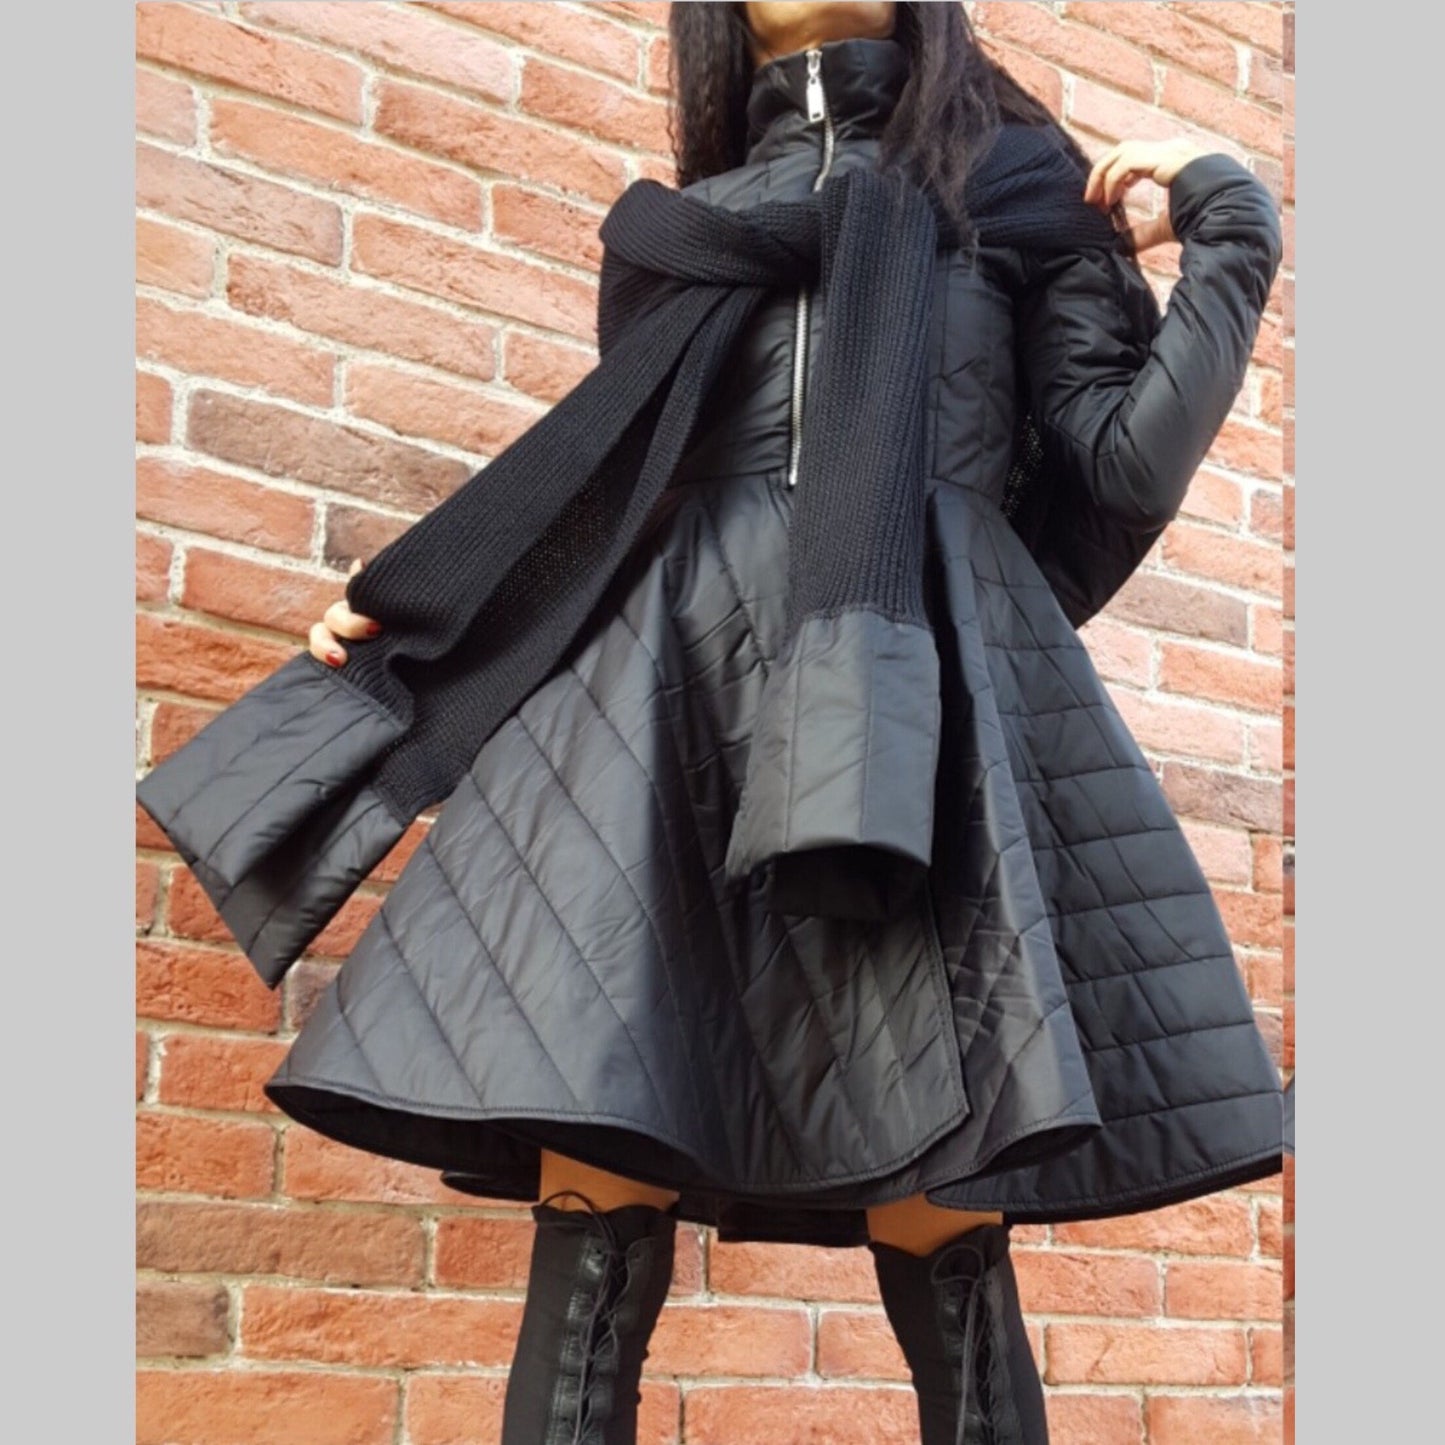 Quilted Asymmetric Coat - Handmade clothing from AngelBySilvia - Top Designer Brands 